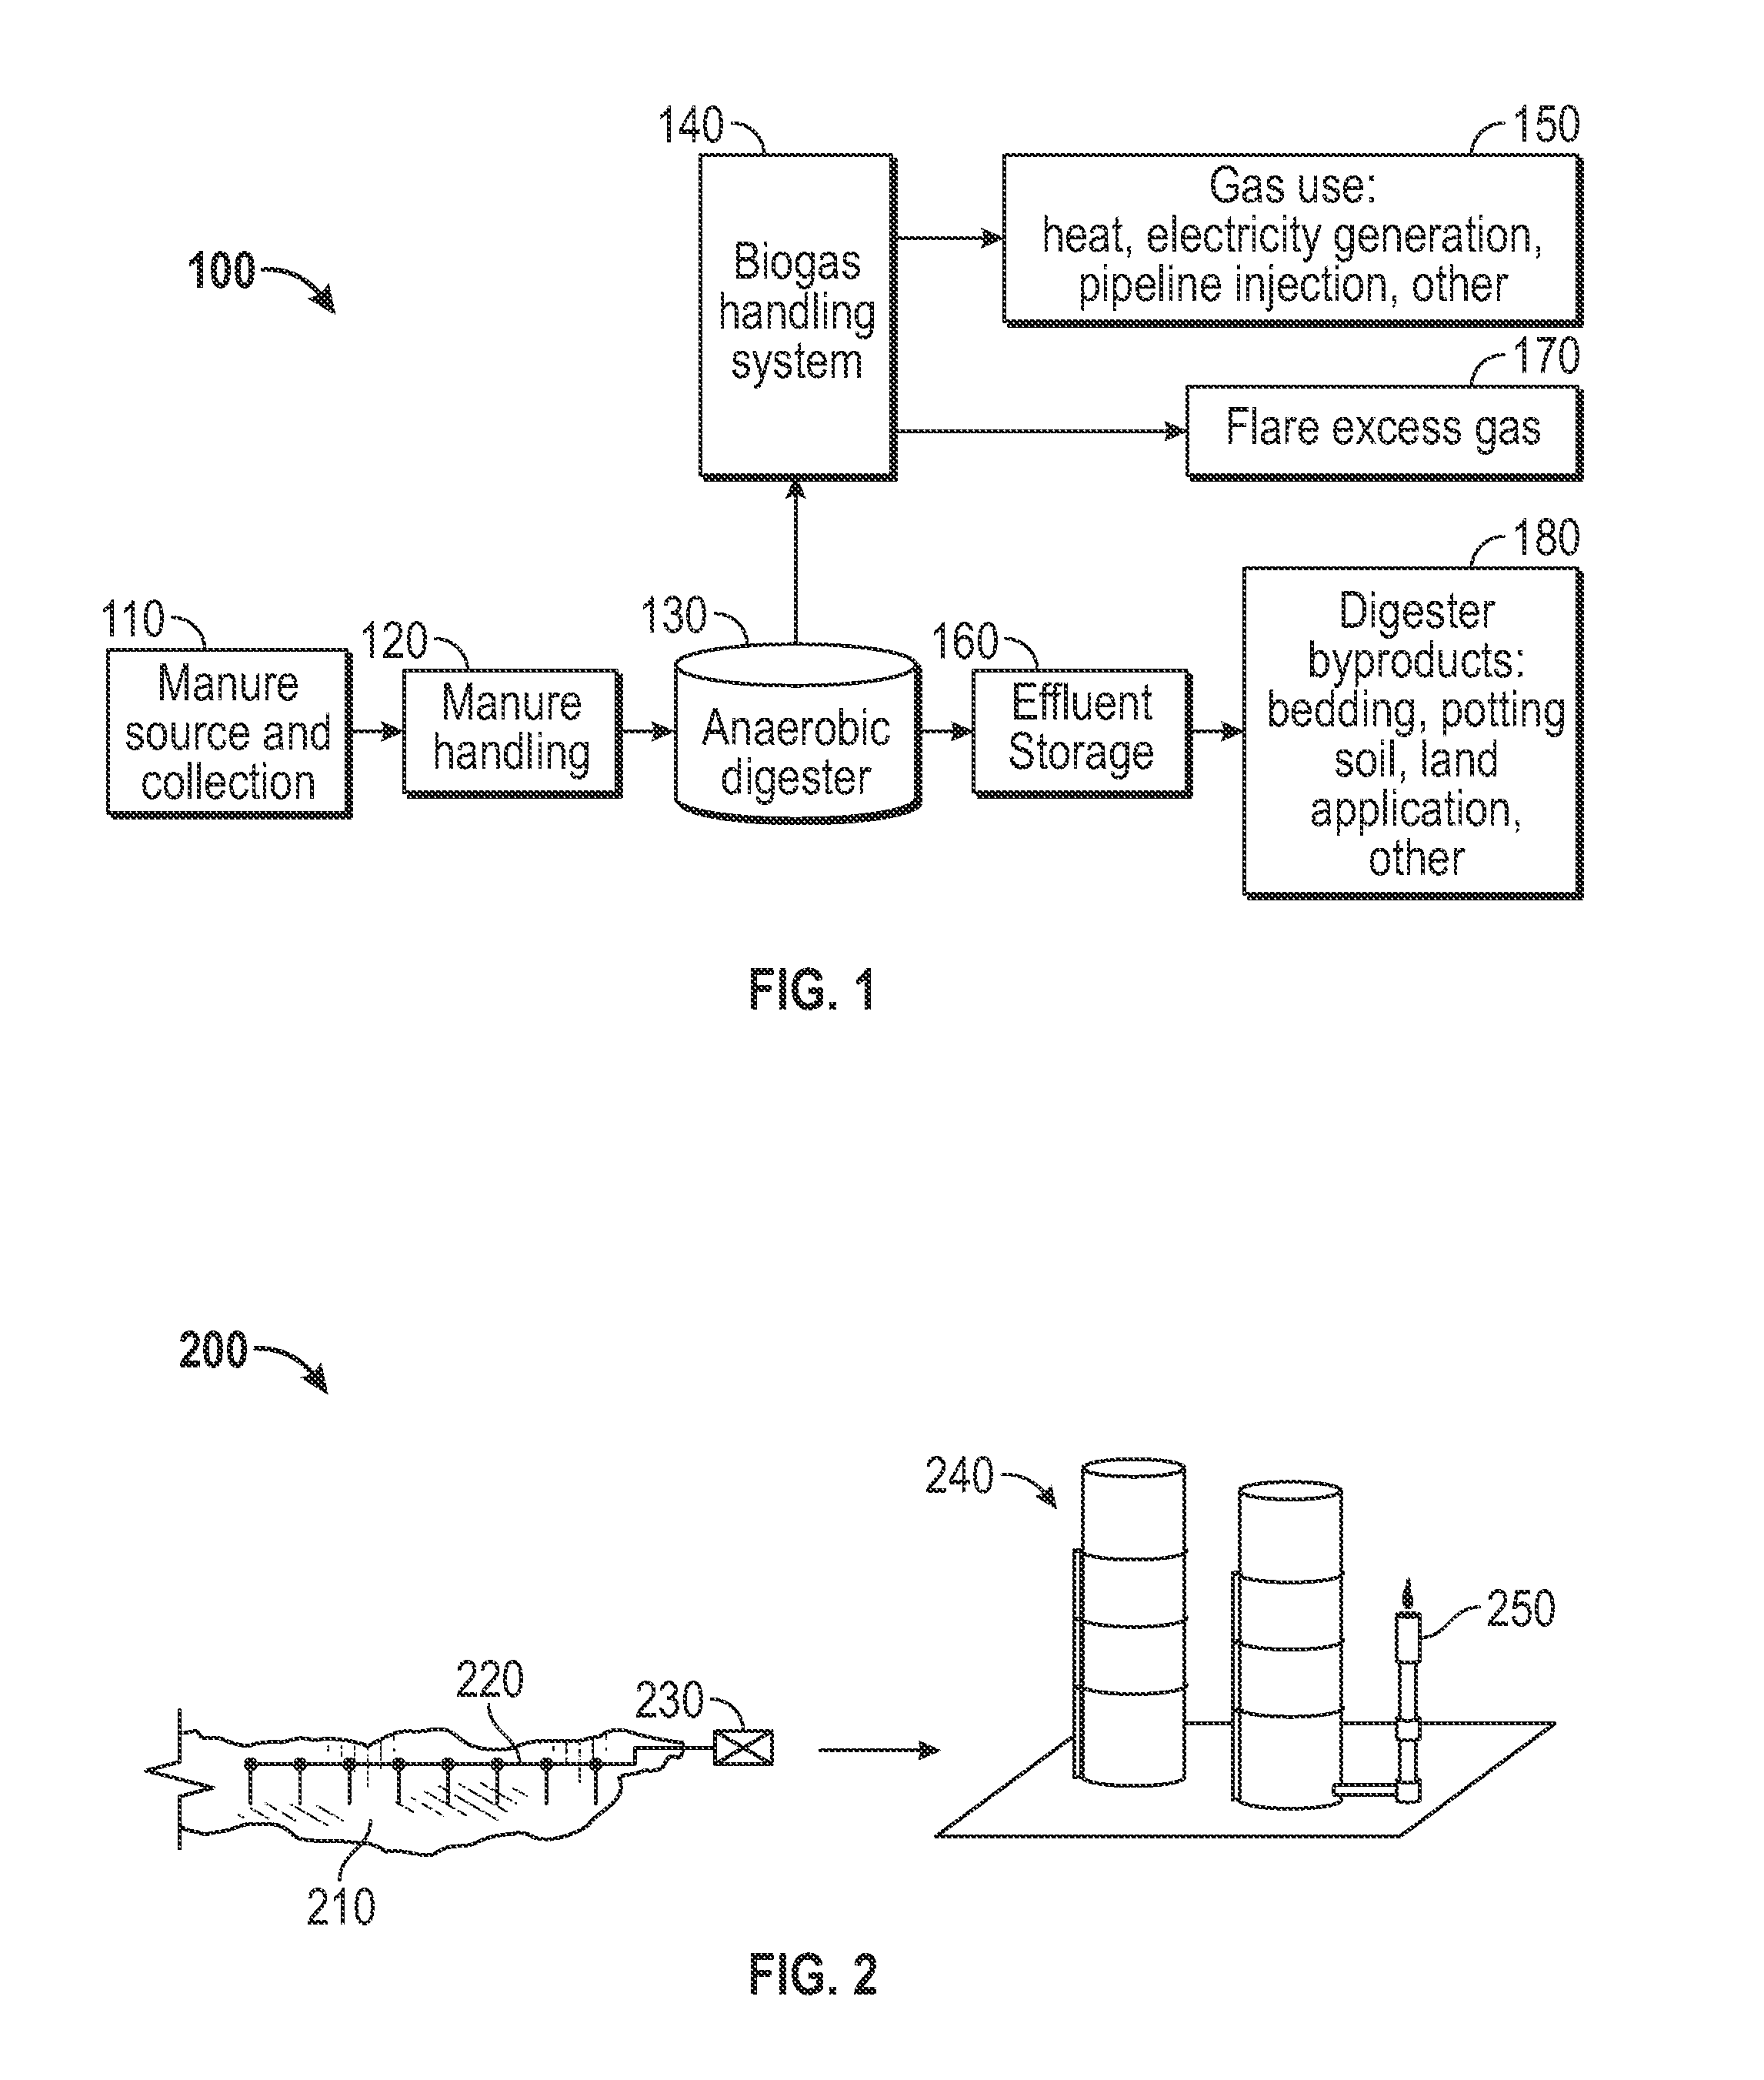 Regenerative thermal oxidizer for the reduction or elimination of supplemental fuel gas consumption